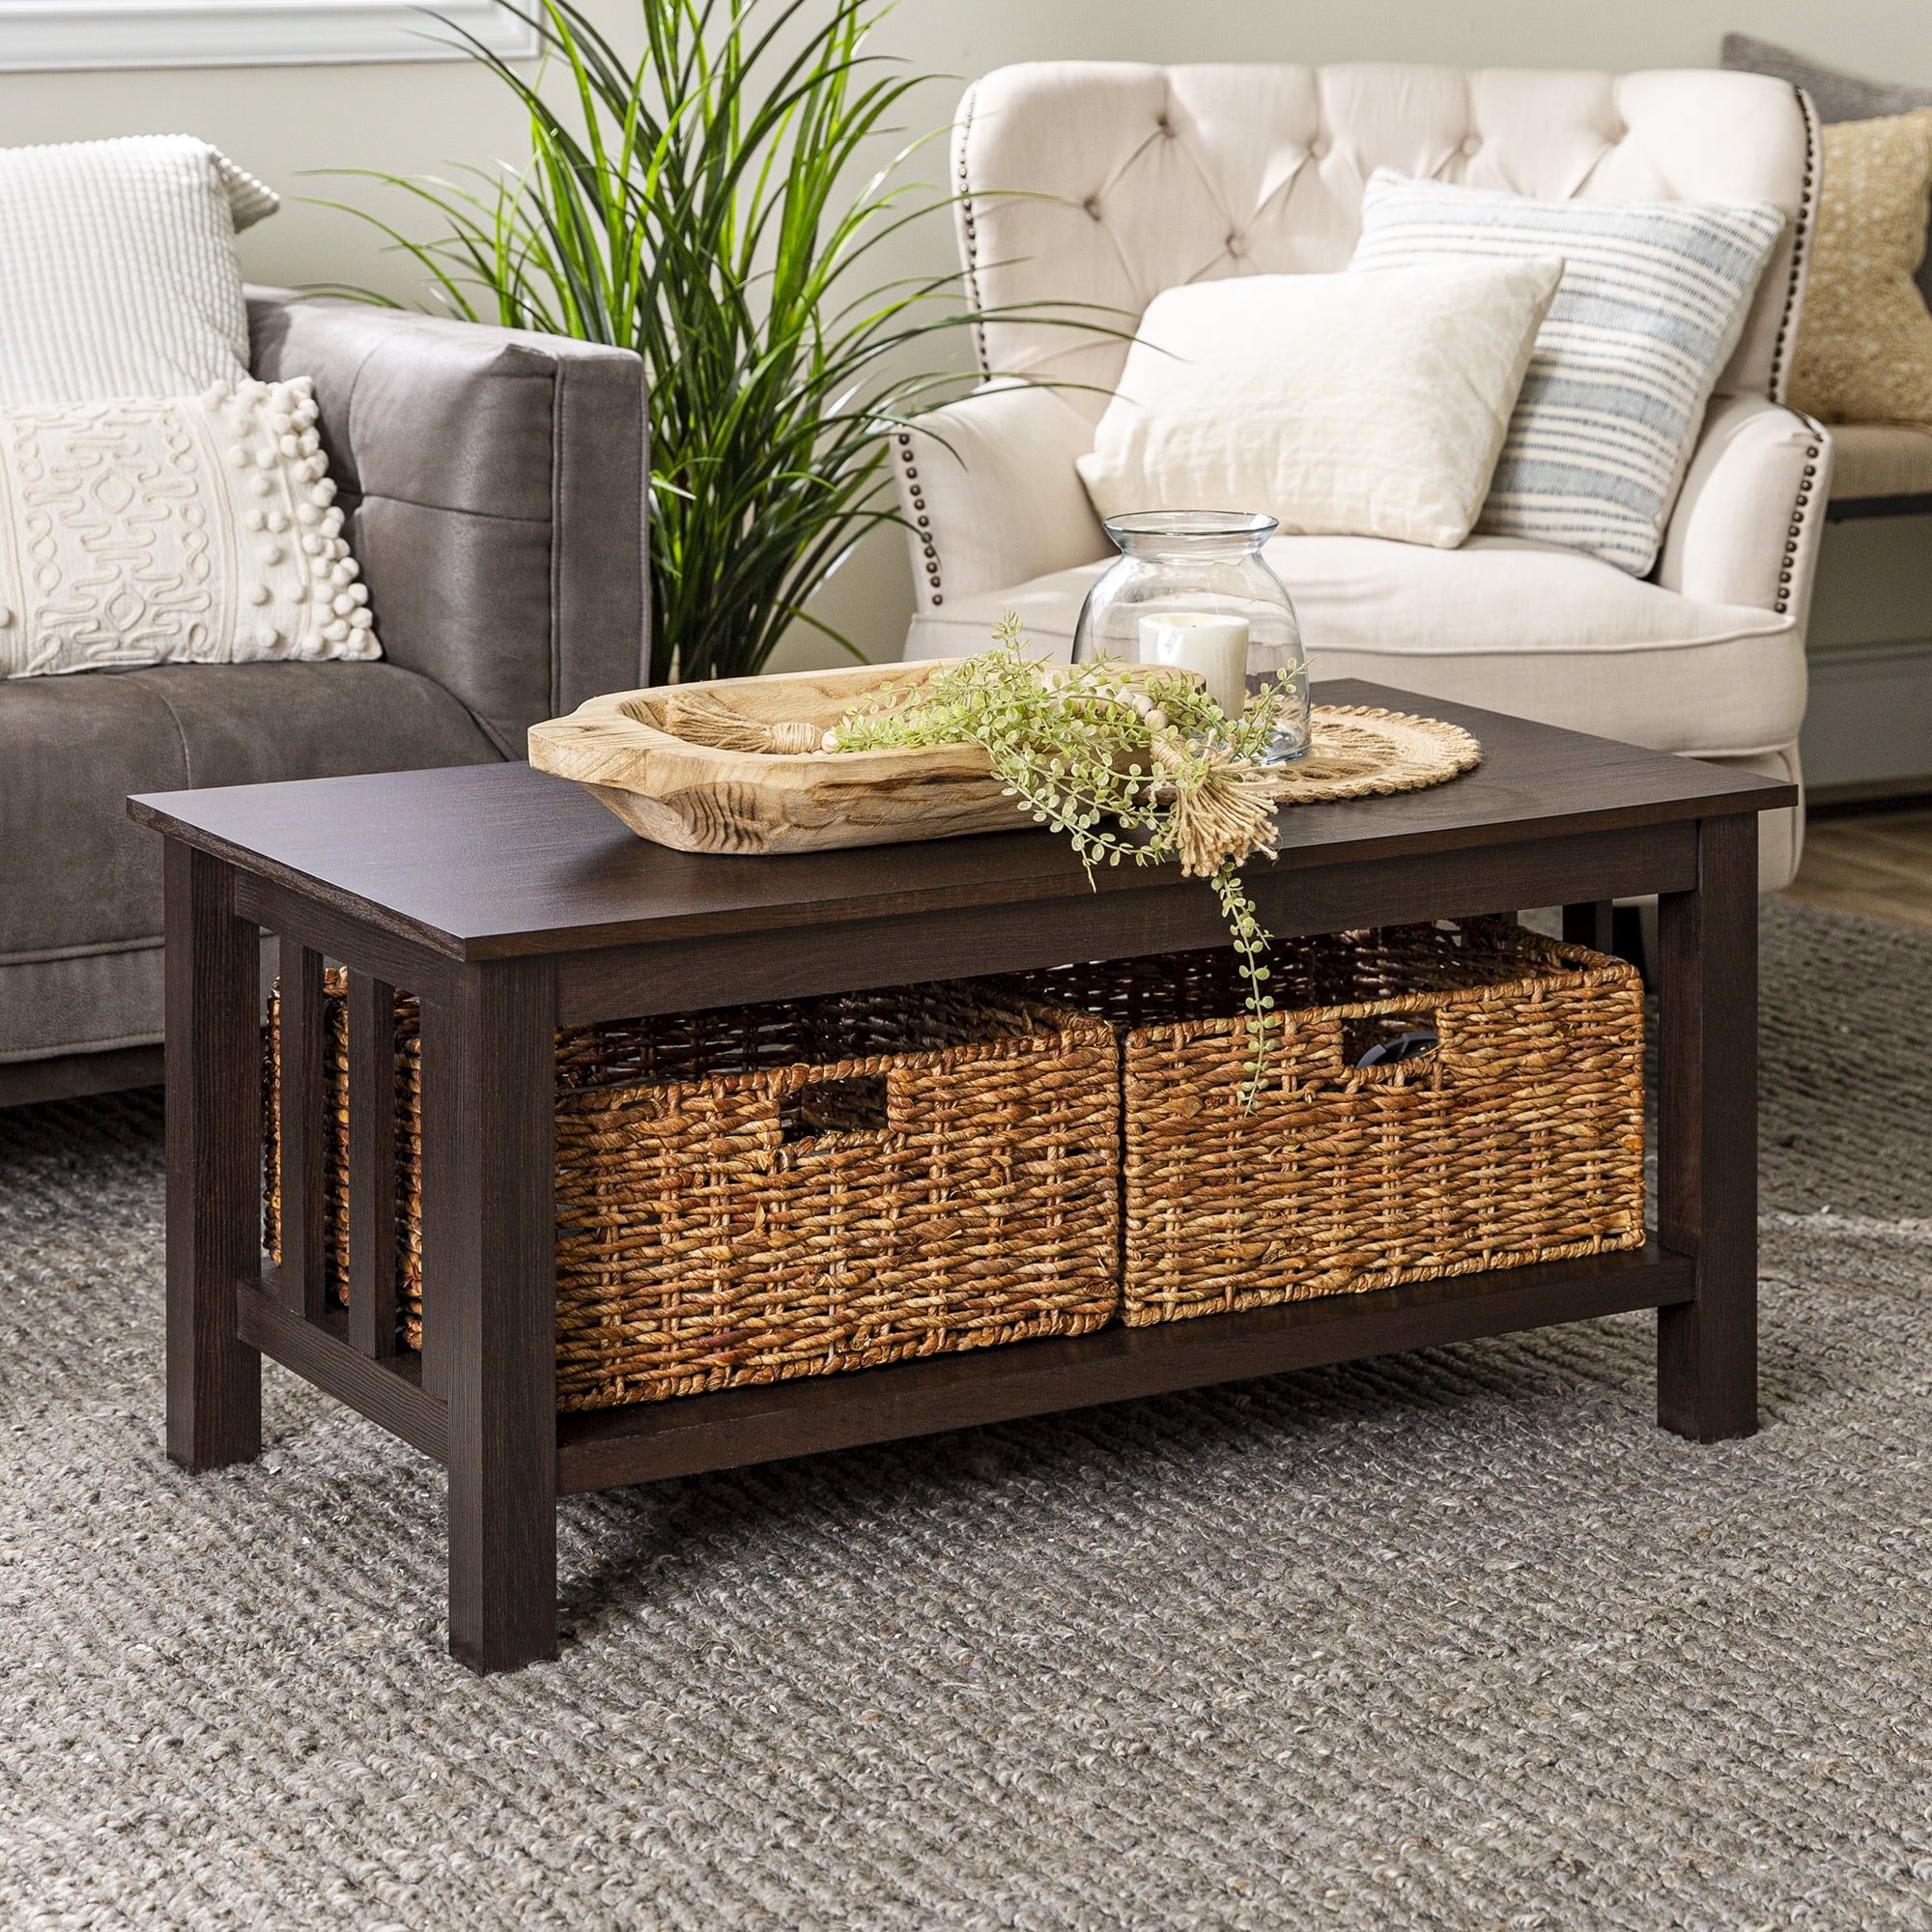 Woven Paths Traditional Storage Coffee Table With Bins, Espresso Inside Woven Paths Coffee Tables (Photo 8 of 15)